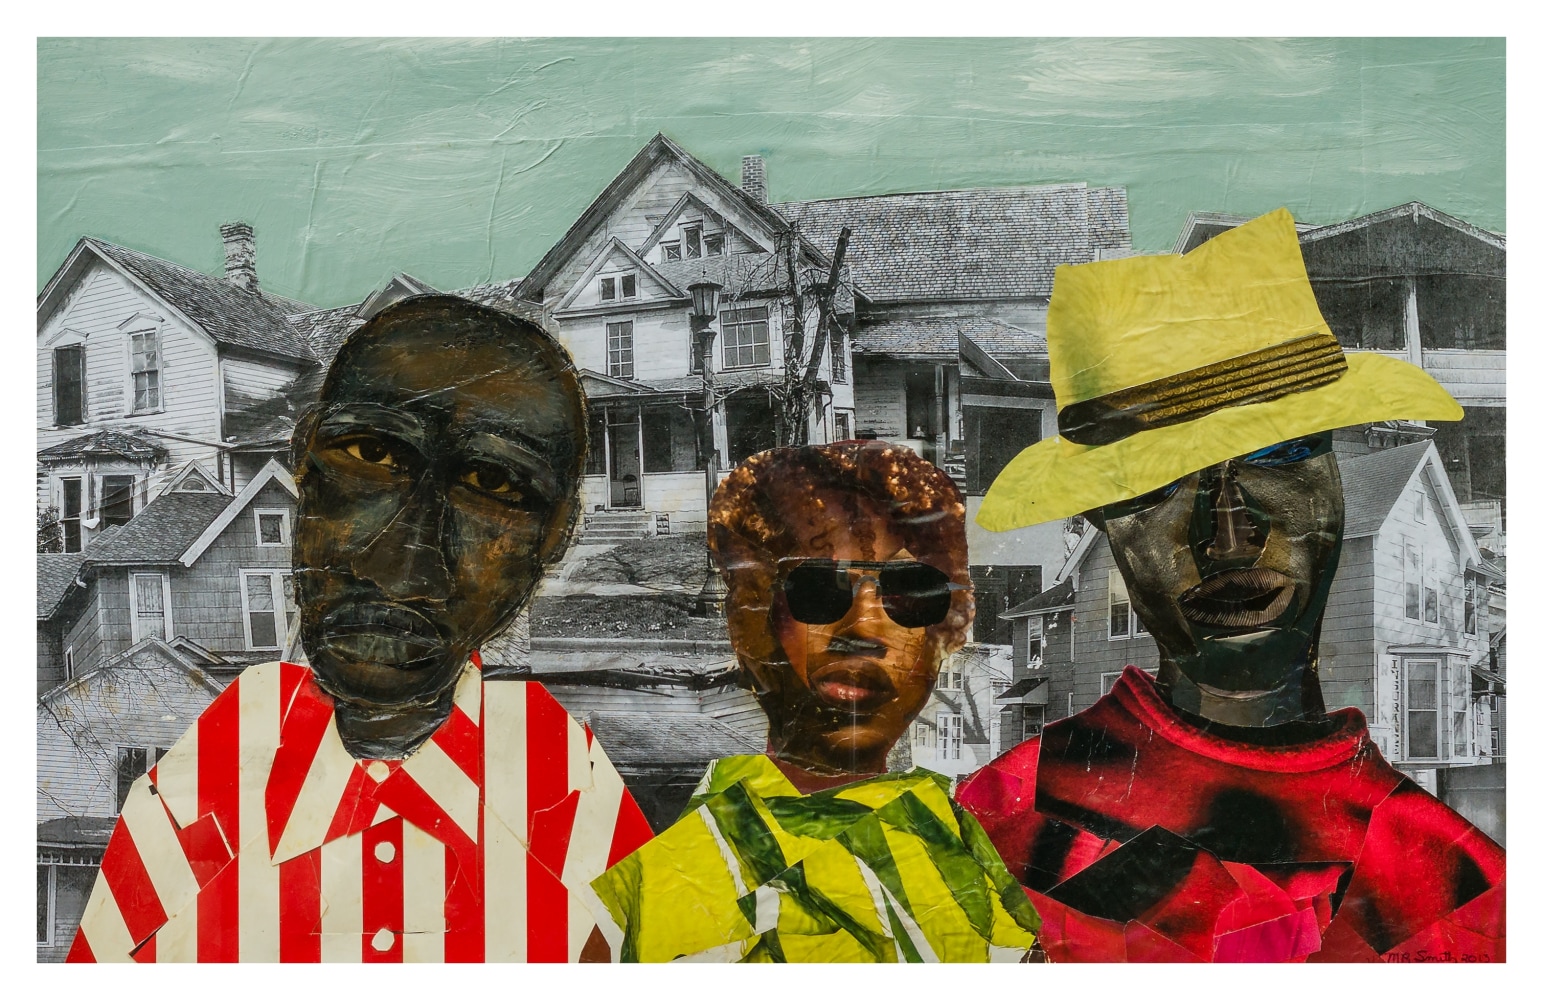 Combs Family, 2003
Paper collage and paint on matboard
22.75 x 35.75 inches